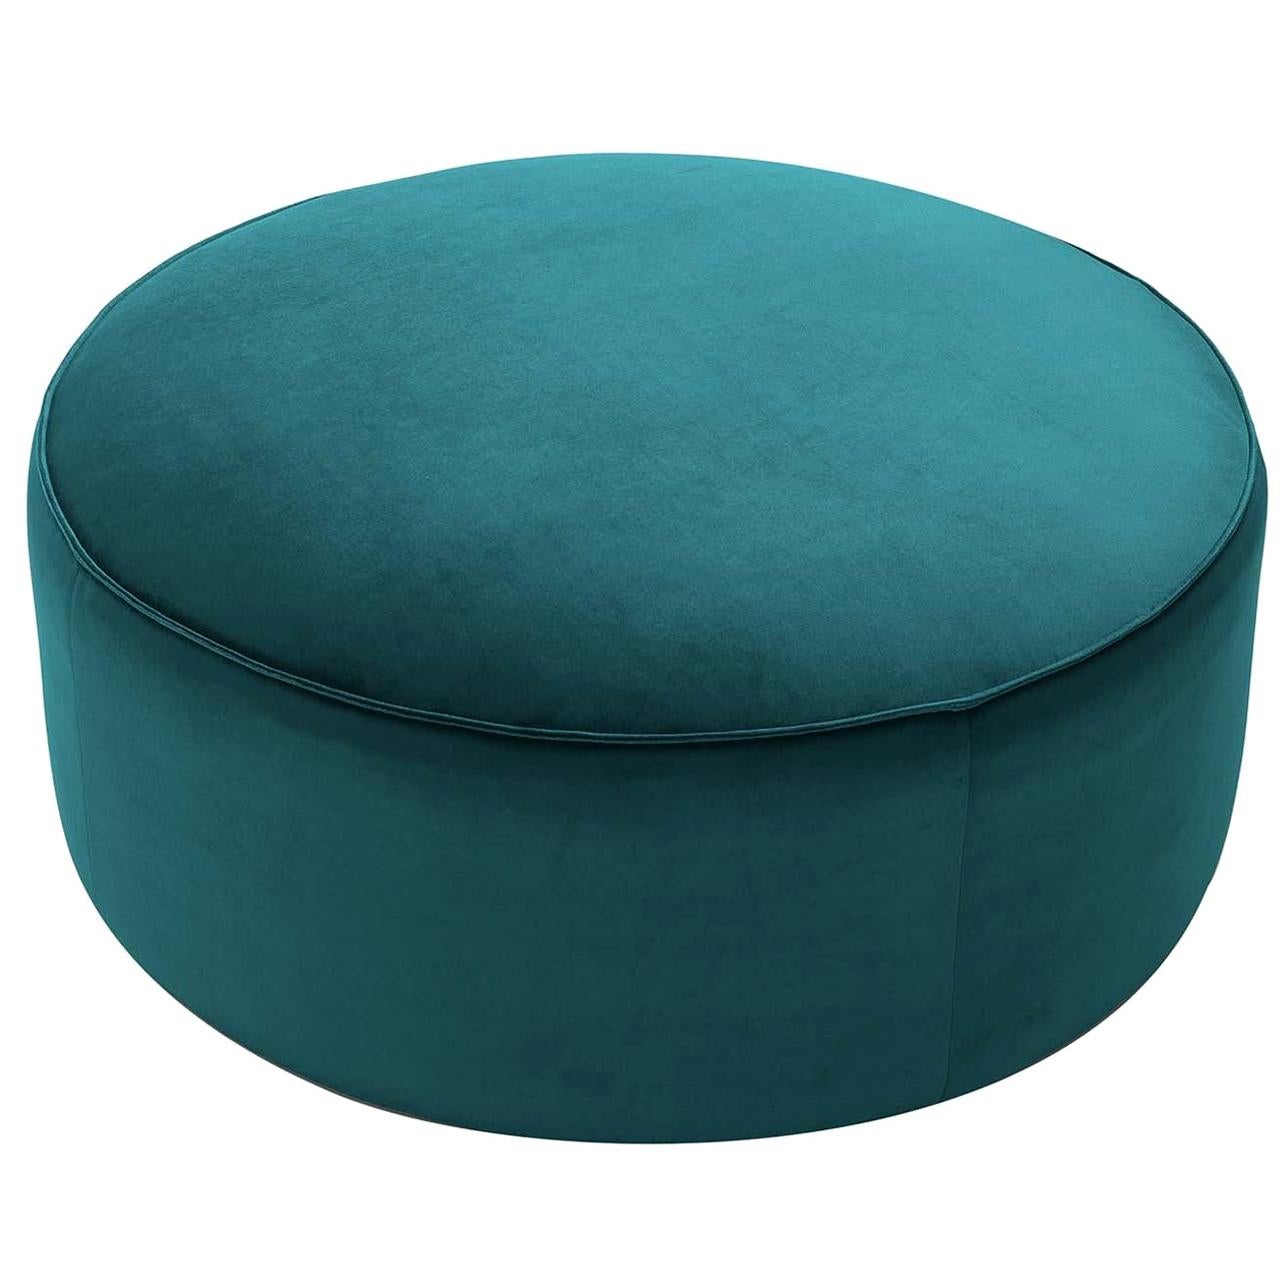 Ted Green Round Pouf